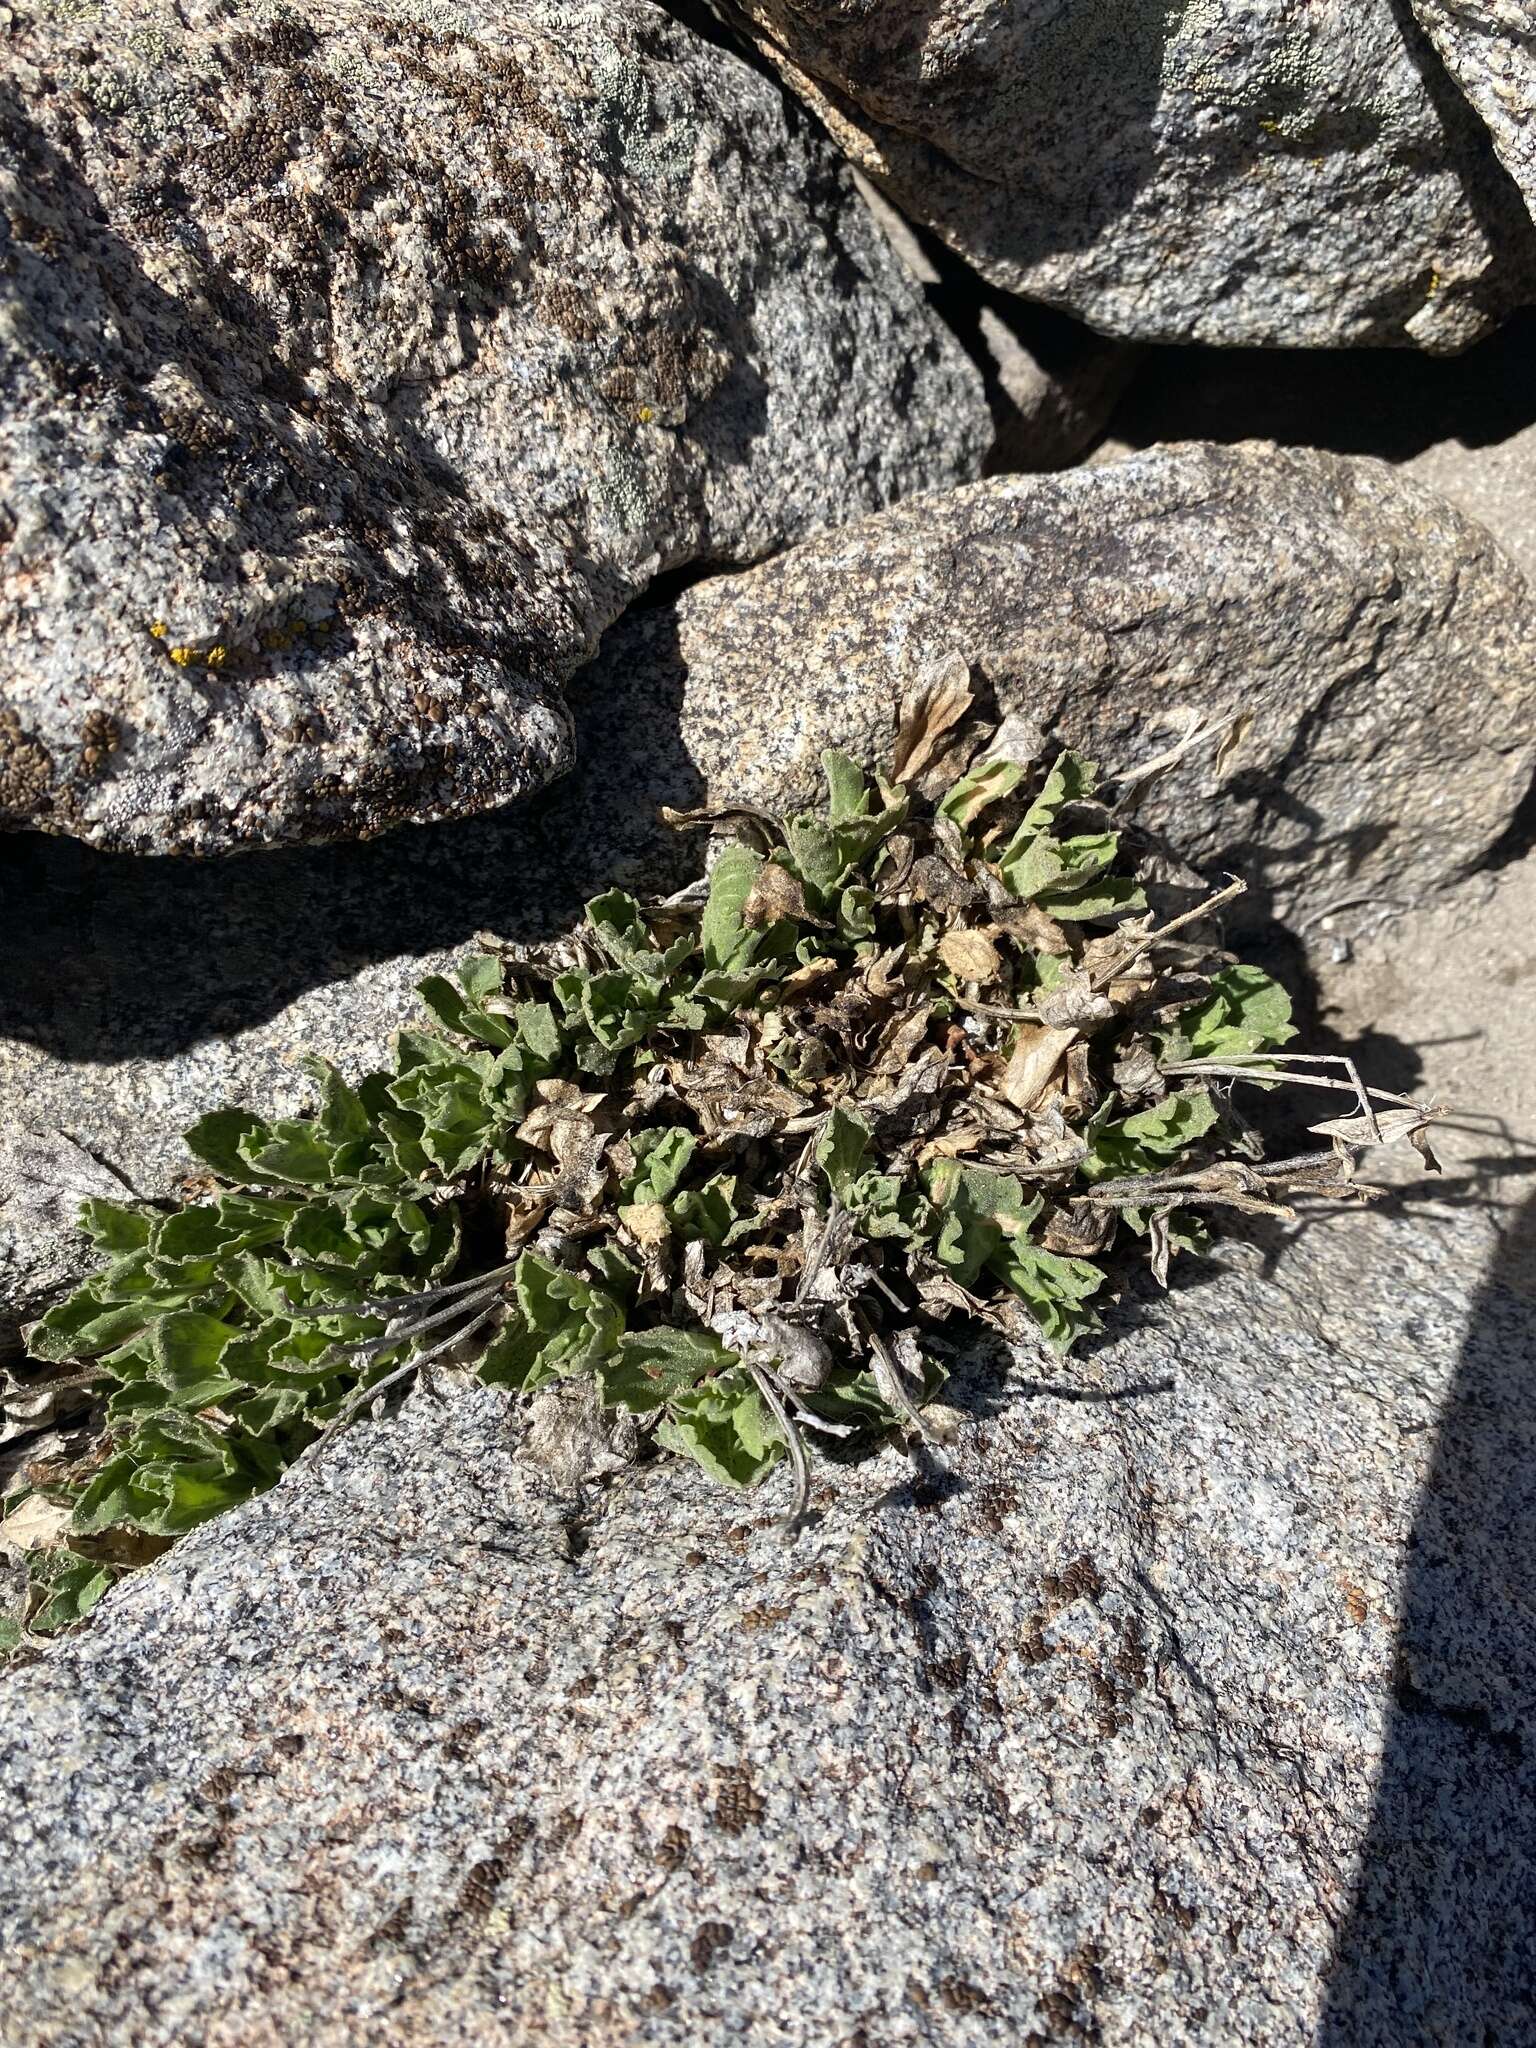 Image of Peirson's serpentweed